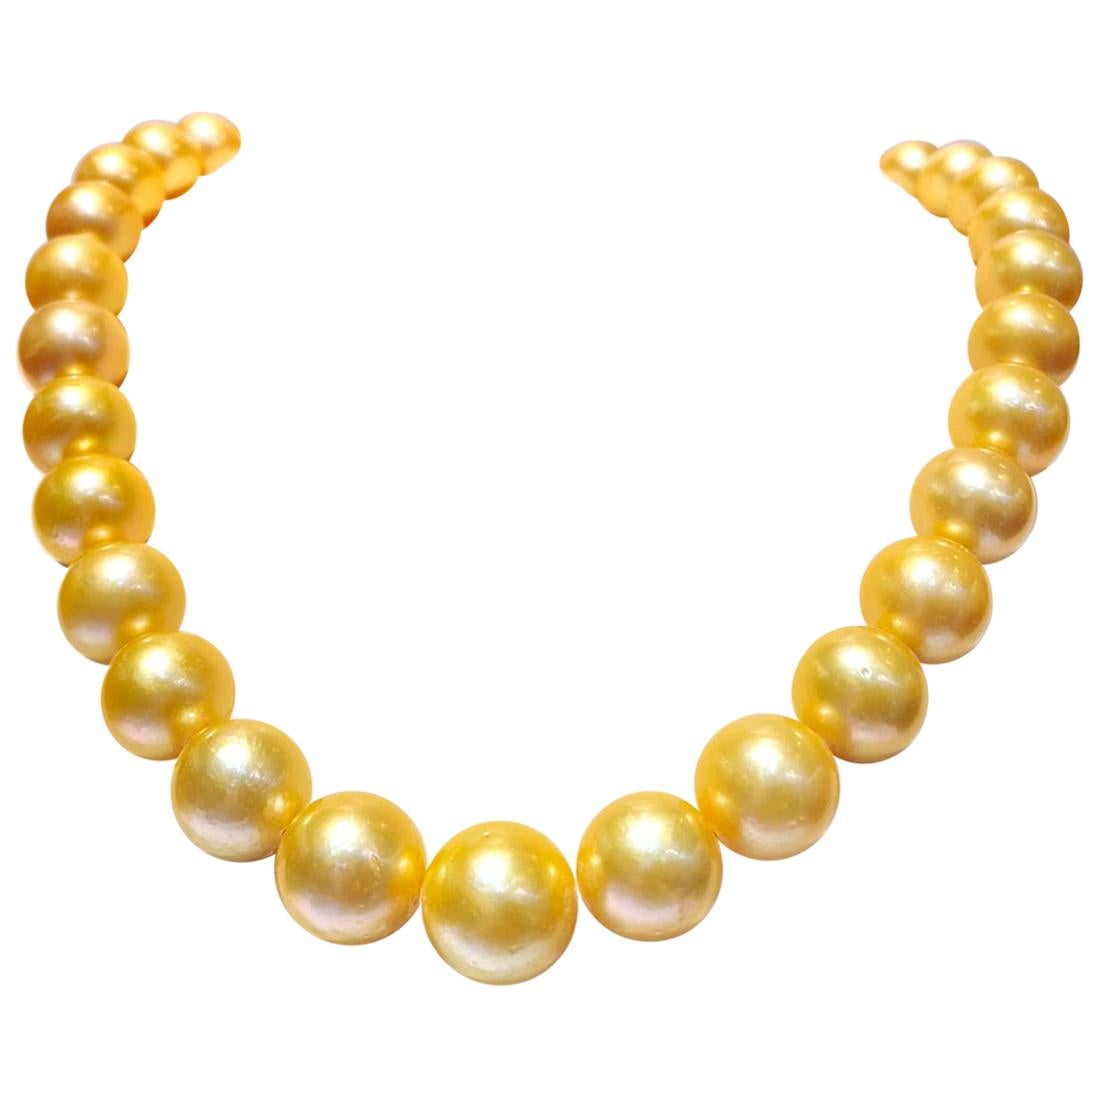 Round Golden South Sea Pearl 33pcs Will Be More When Strung For Sale